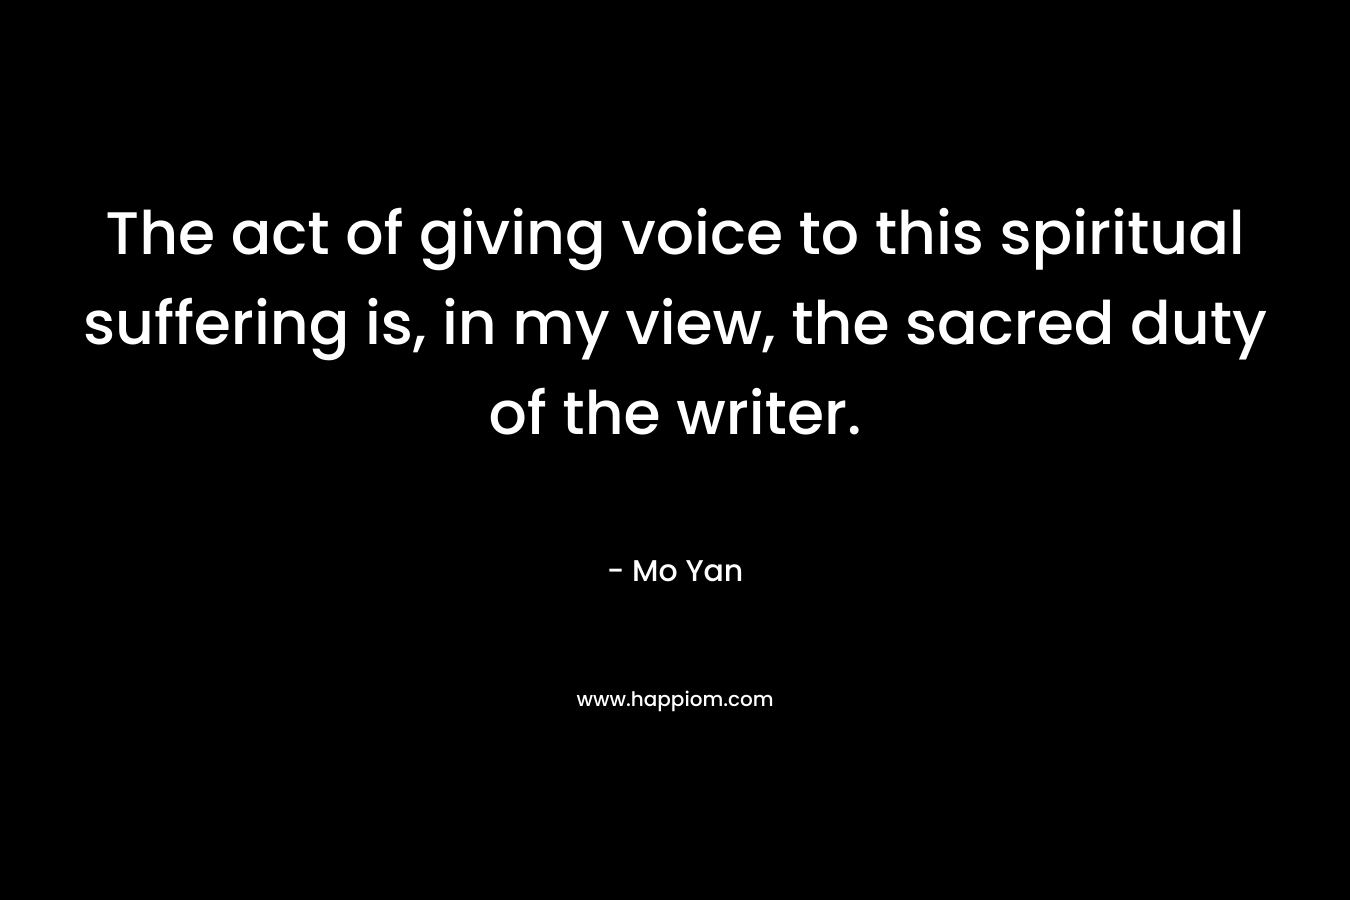 The act of giving voice to this spiritual suffering is, in my view, the sacred duty of the writer. – Mo Yan